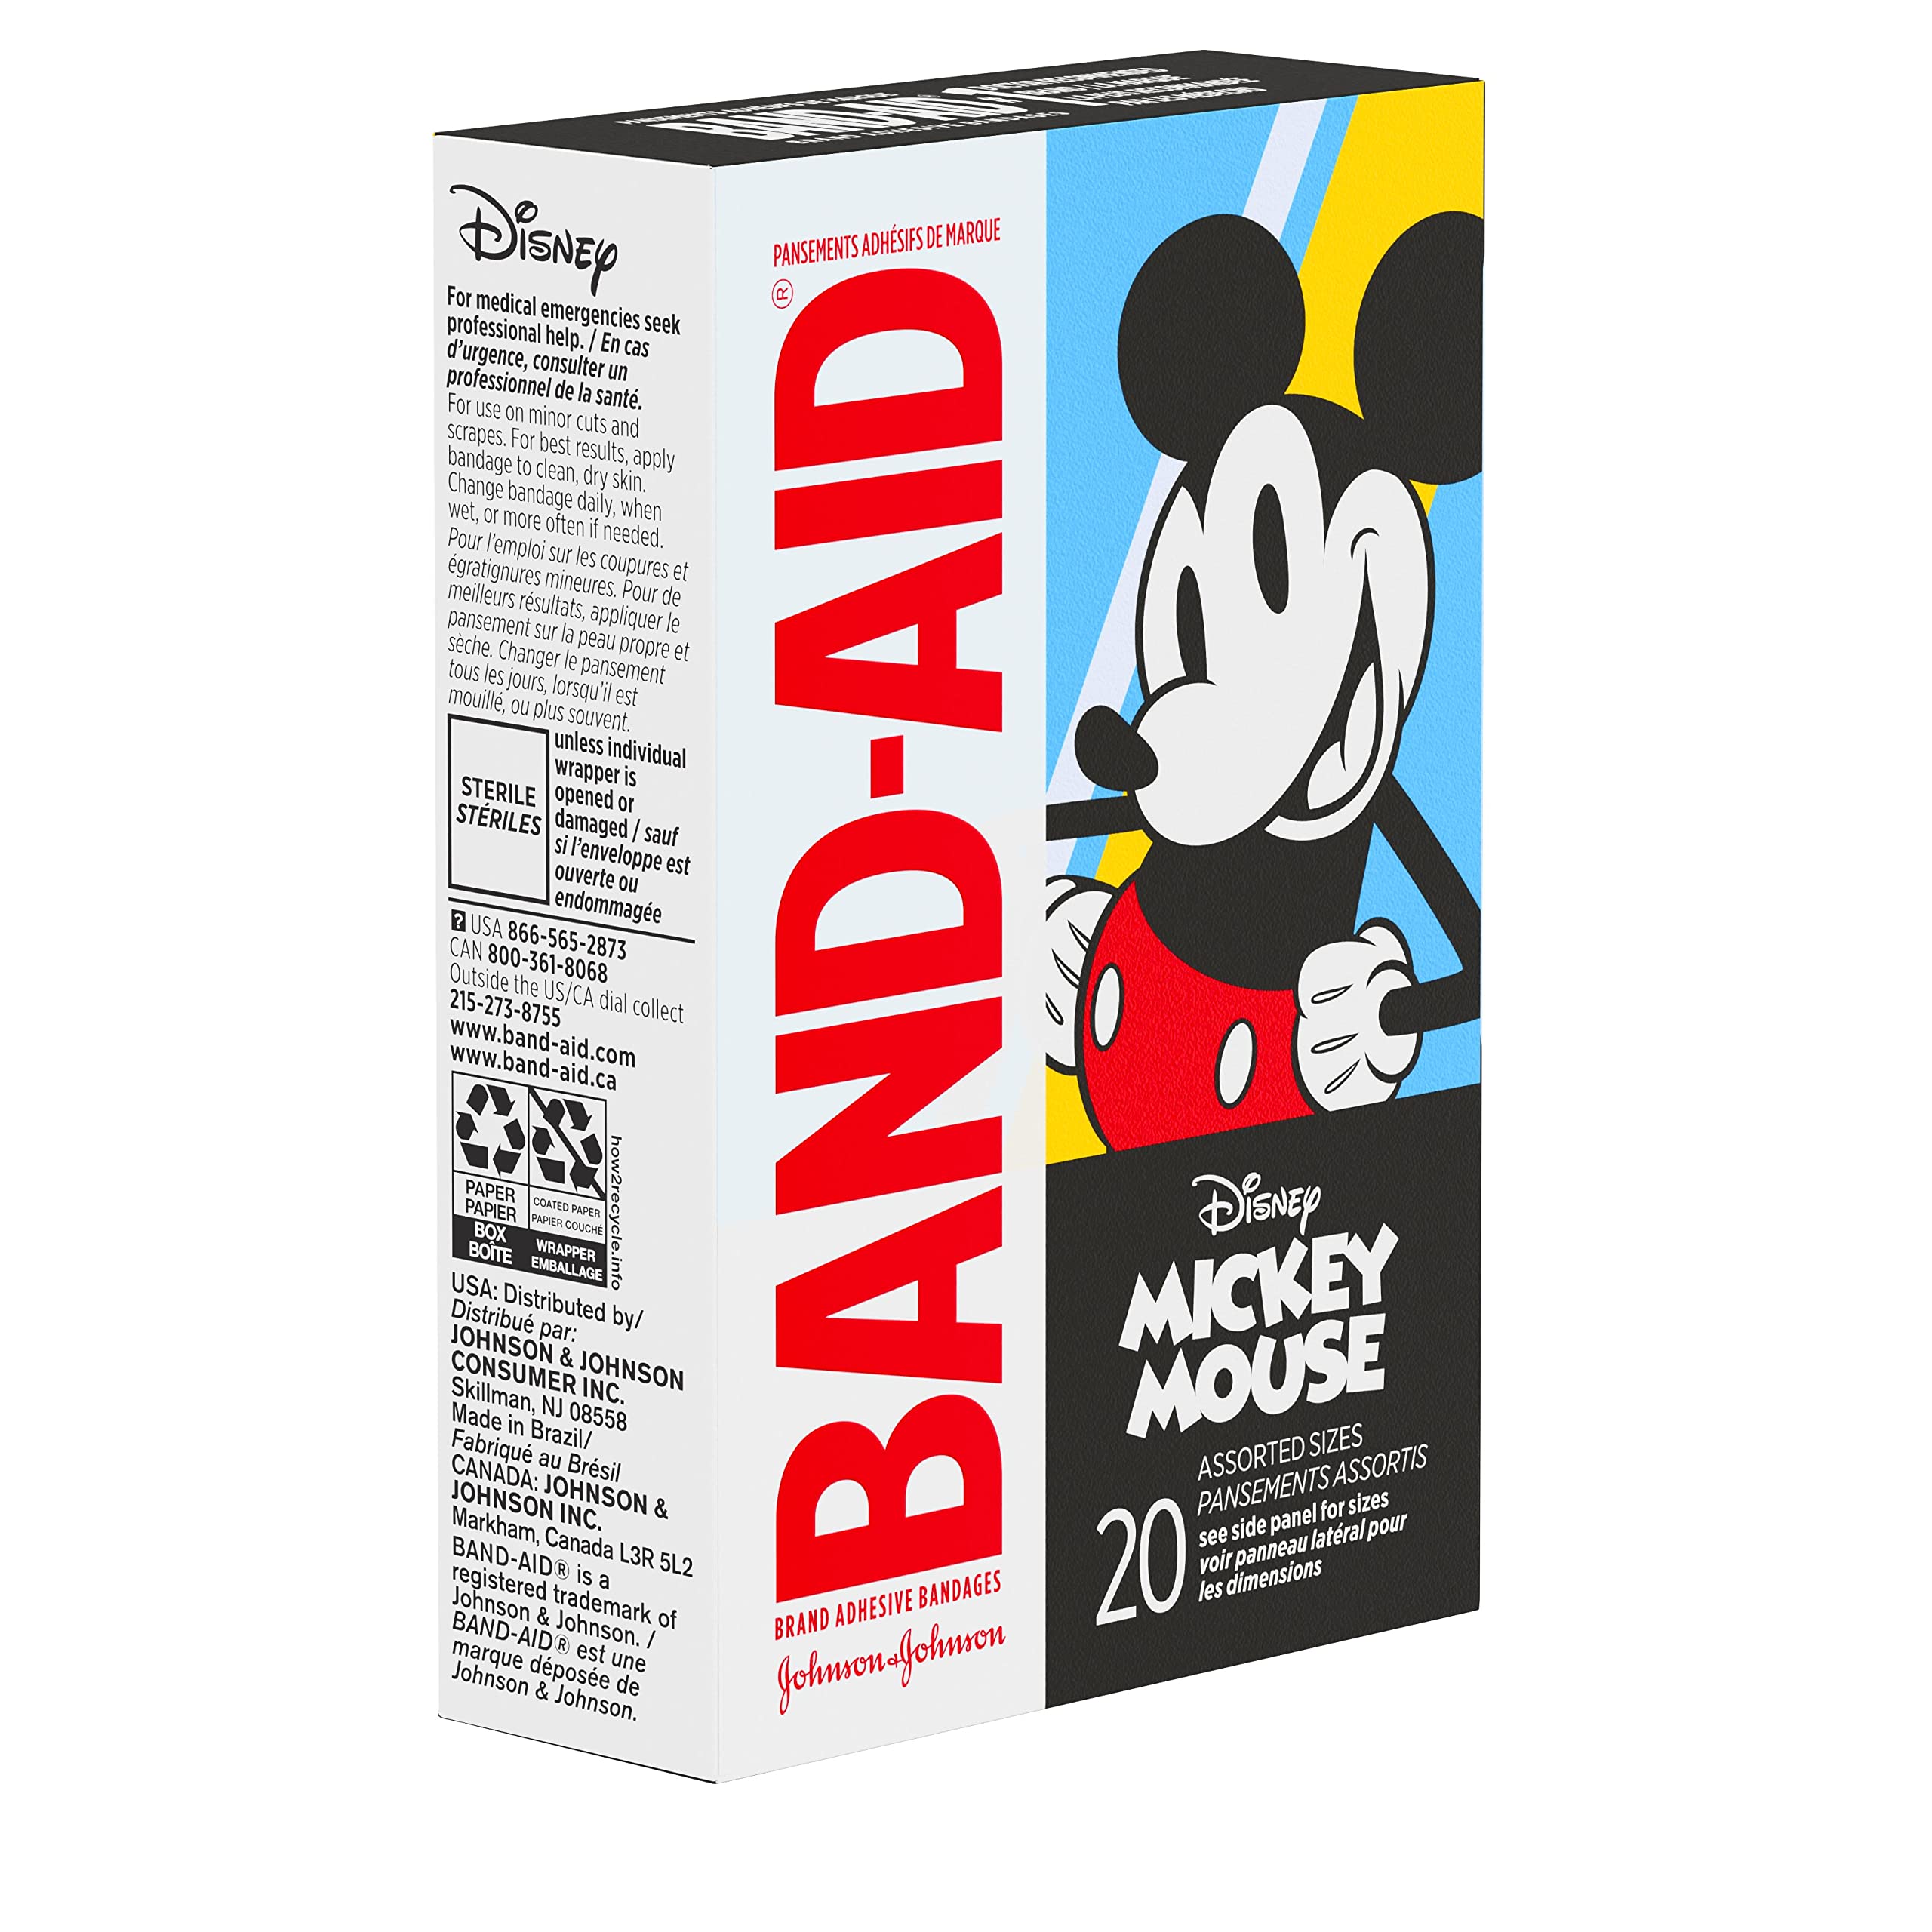 Band-Aid Brand Adhesive Bandages for Minor Cuts & Scrapes, Wound Care Featuring Disney's Mickey Mouse, Fun Bandages for Kids and Toddlers, Assorted Sizes, 20 Count